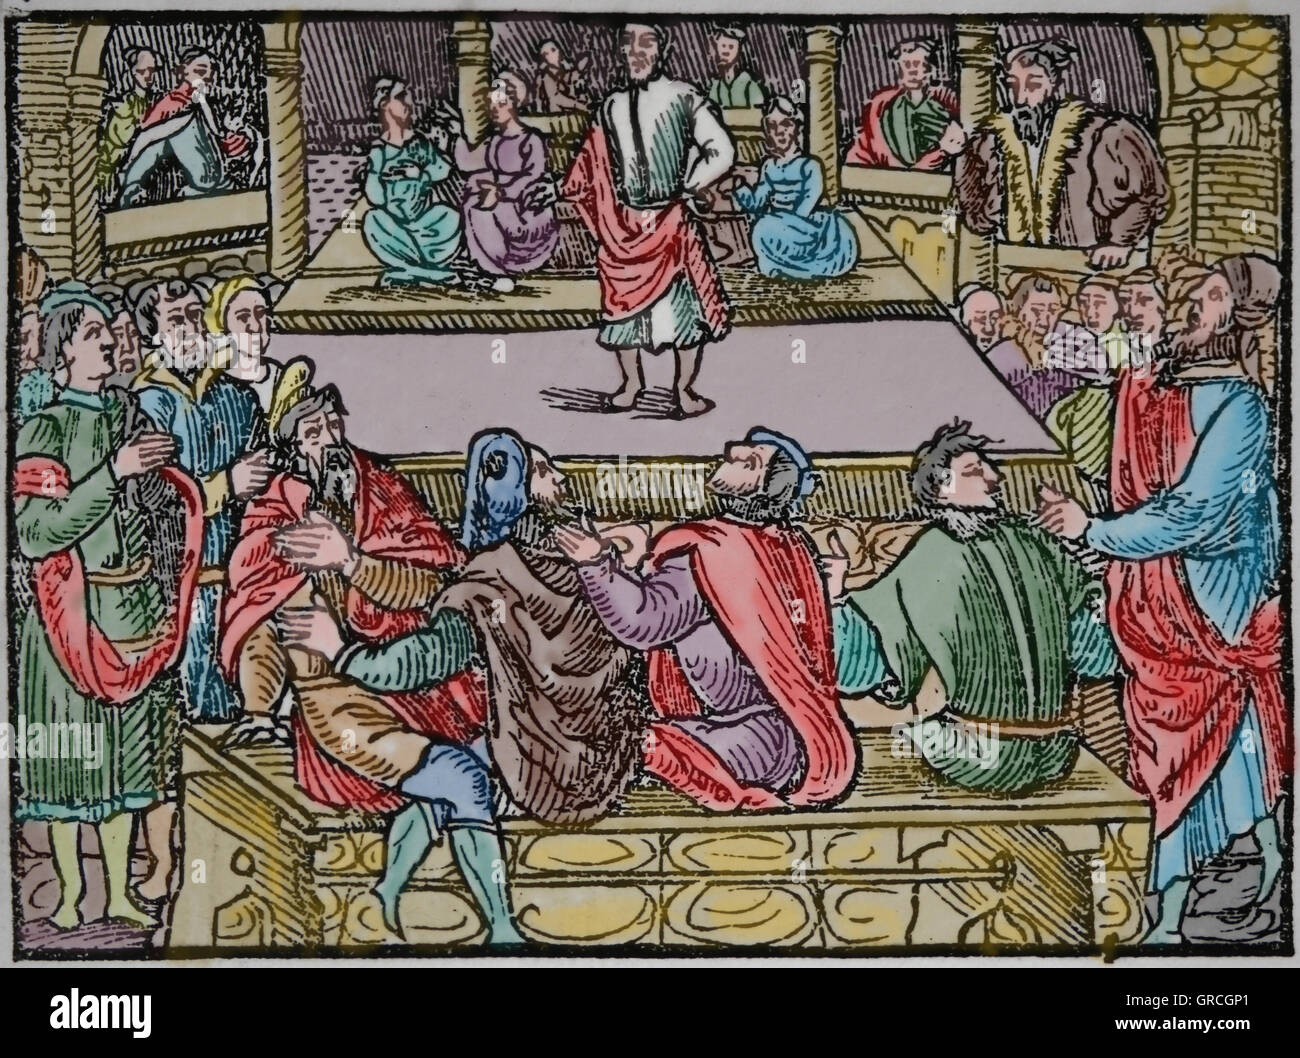 Latin literature. Theatre performance in France (16th century) imitating classical times. Colored engraving. Stock Photo